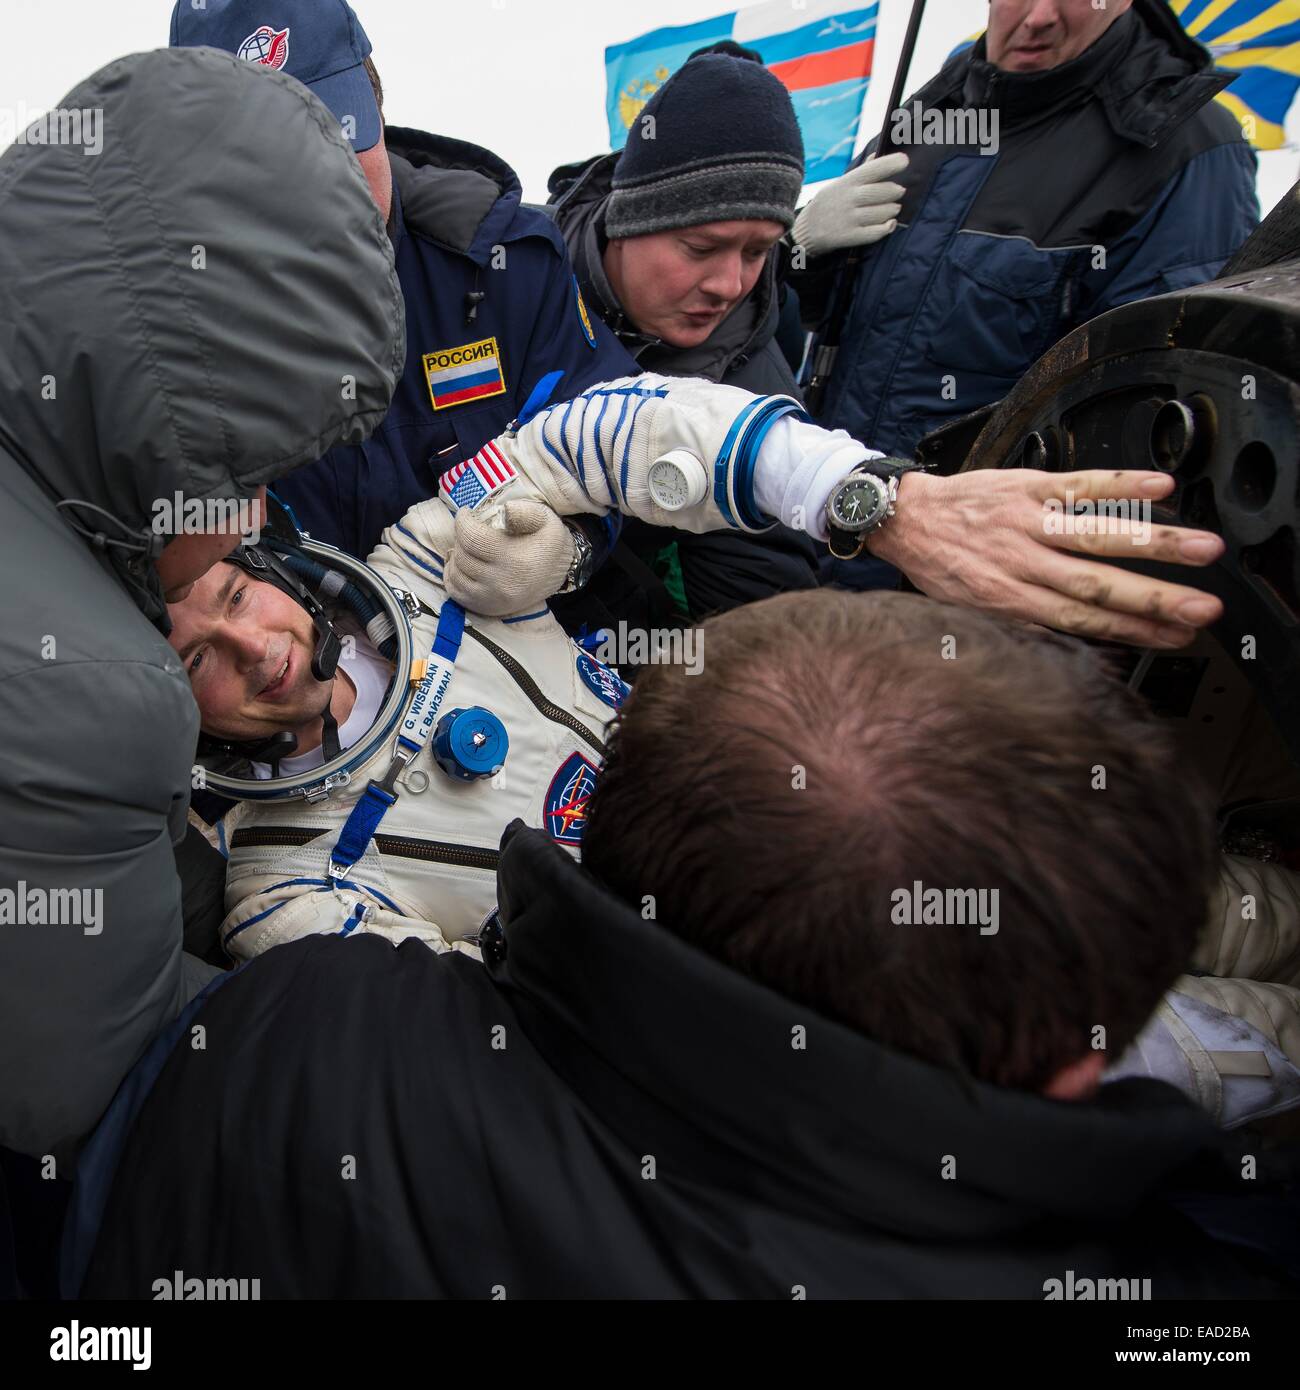 ISS Expedition 41 astronaut Reid Wiseman of NASA is helped out of the Soyuz Capsule just minutes after landing in a remote area November 10, 2014 near Arkalyk, Kazakhstan. Suraev, Wiseman and Gerst returned to Earth after more than five months onboard the International Space Station where they served as members of the Expedition 40 and 41 crews. Stock Photo